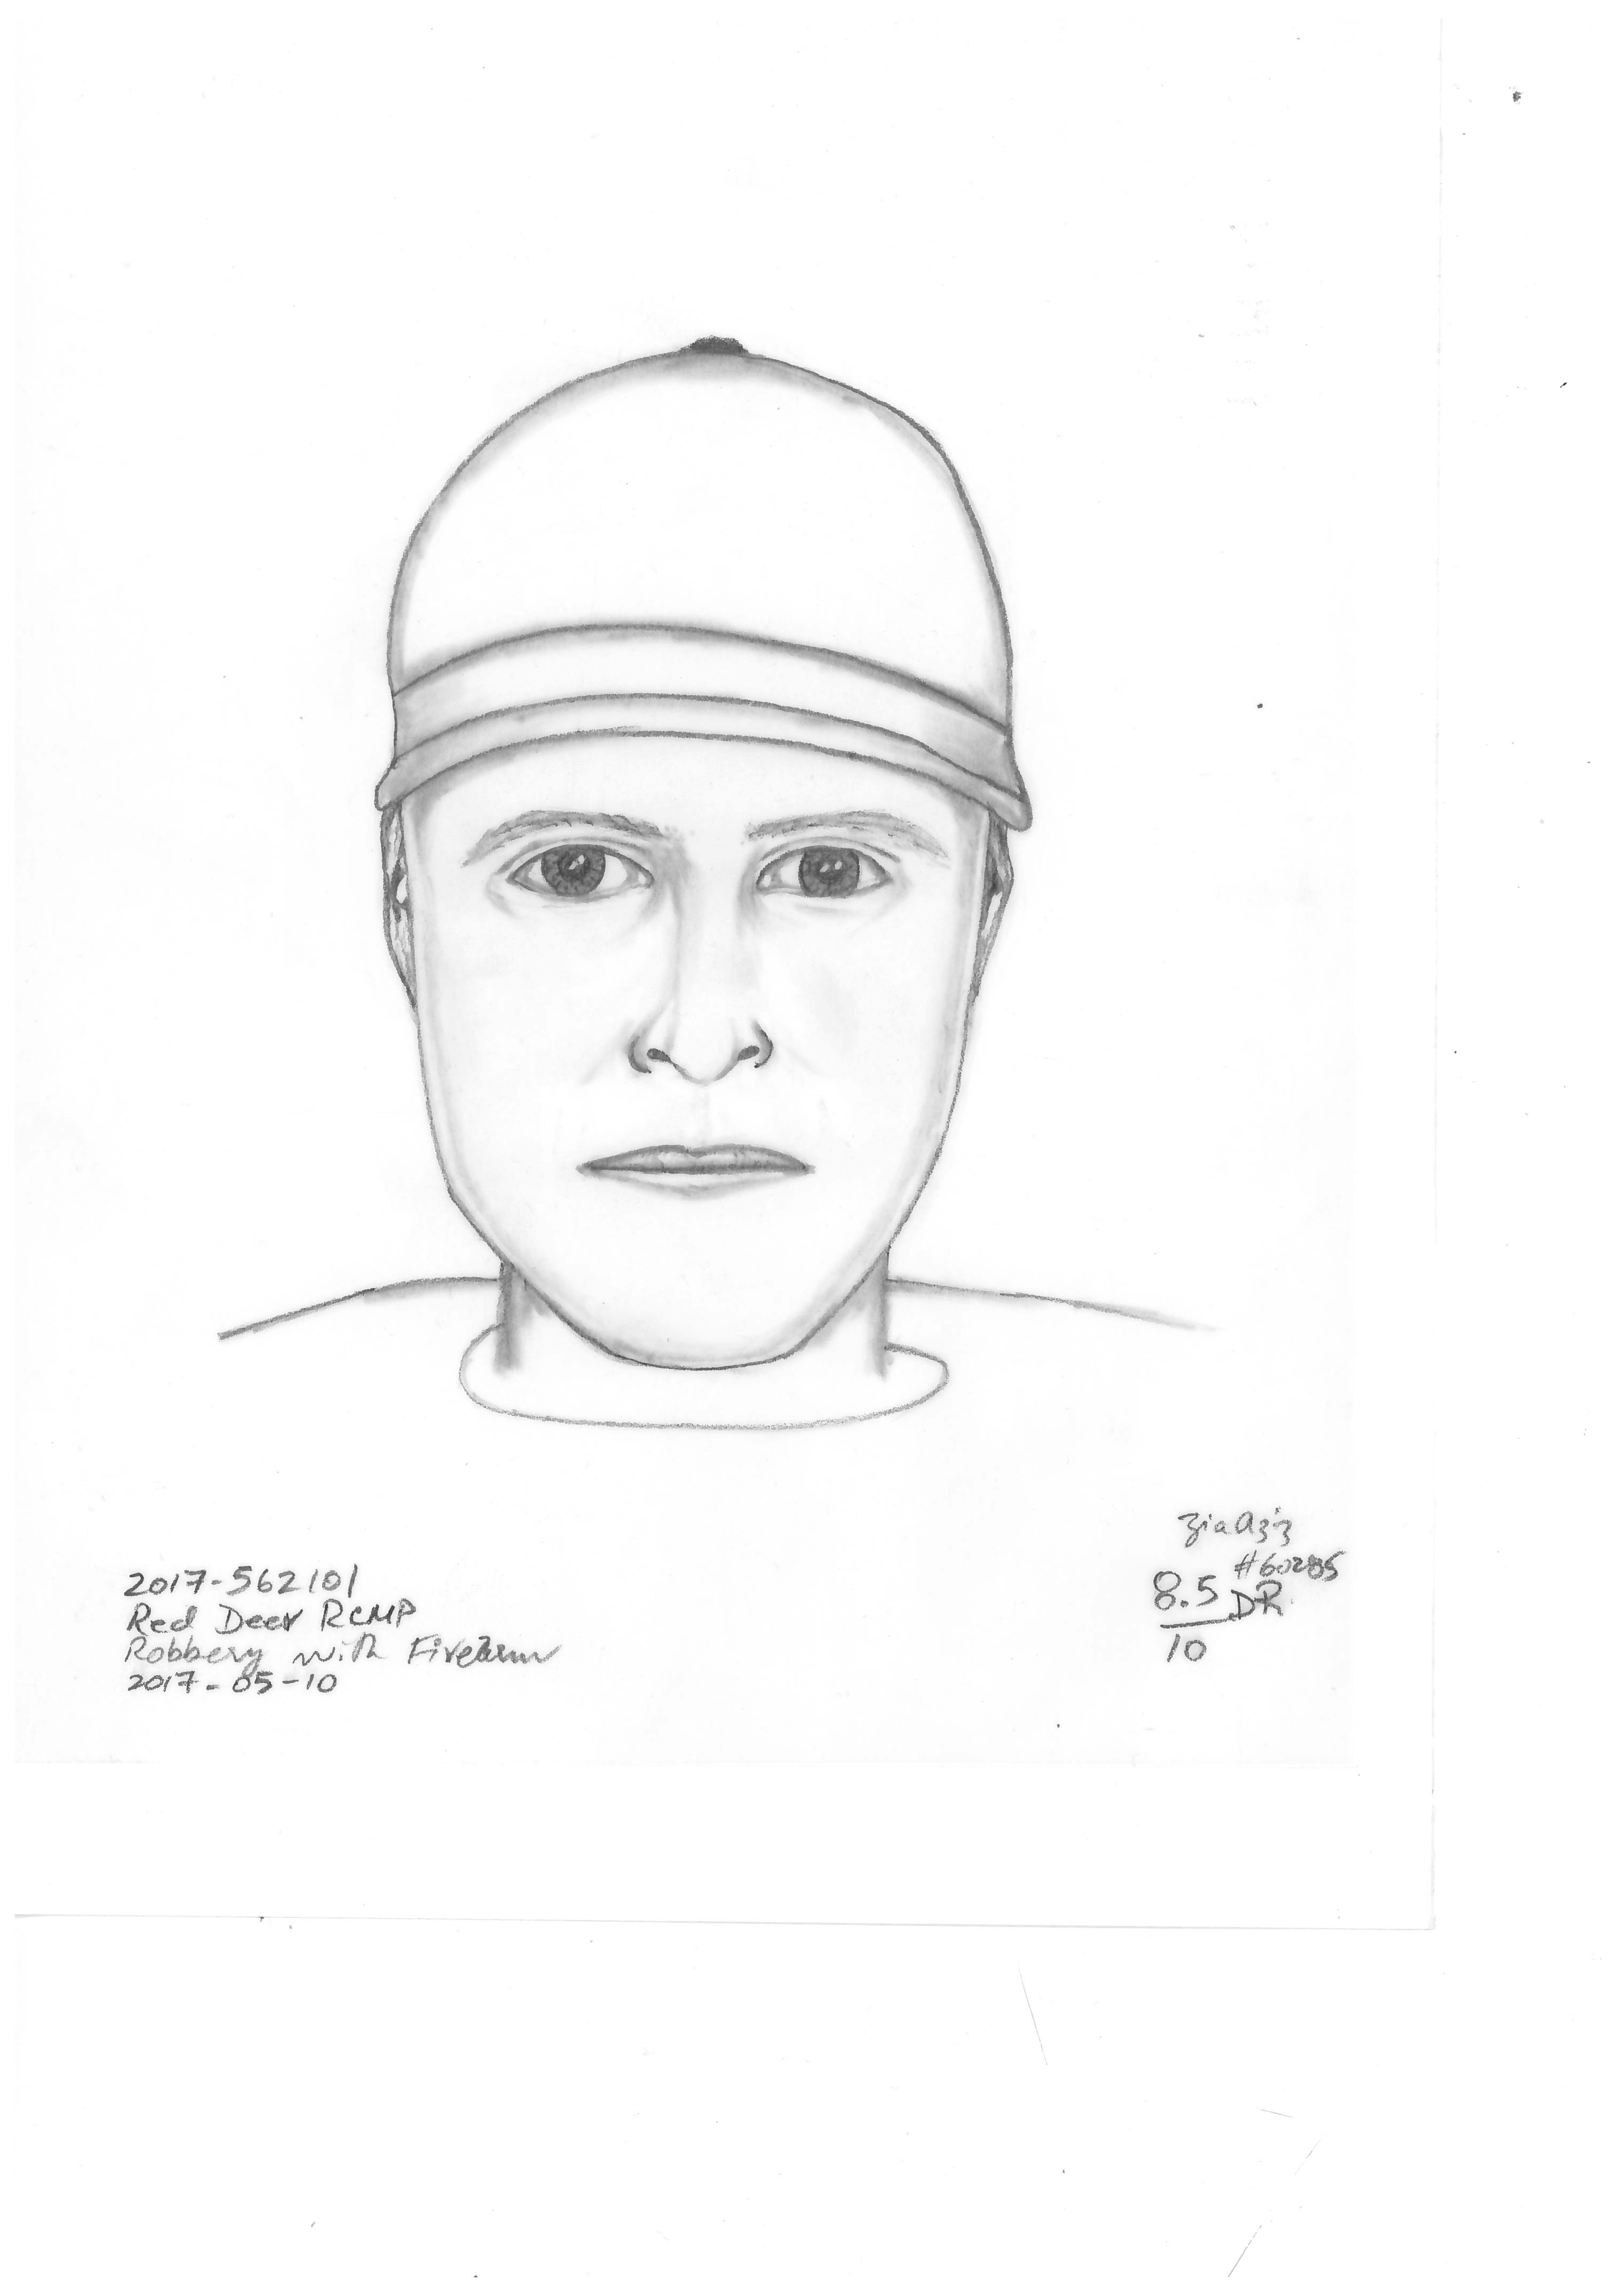 SUSPECT SOUGHT - Police have released a sketch of one of the suspects sought in an armed robbery.